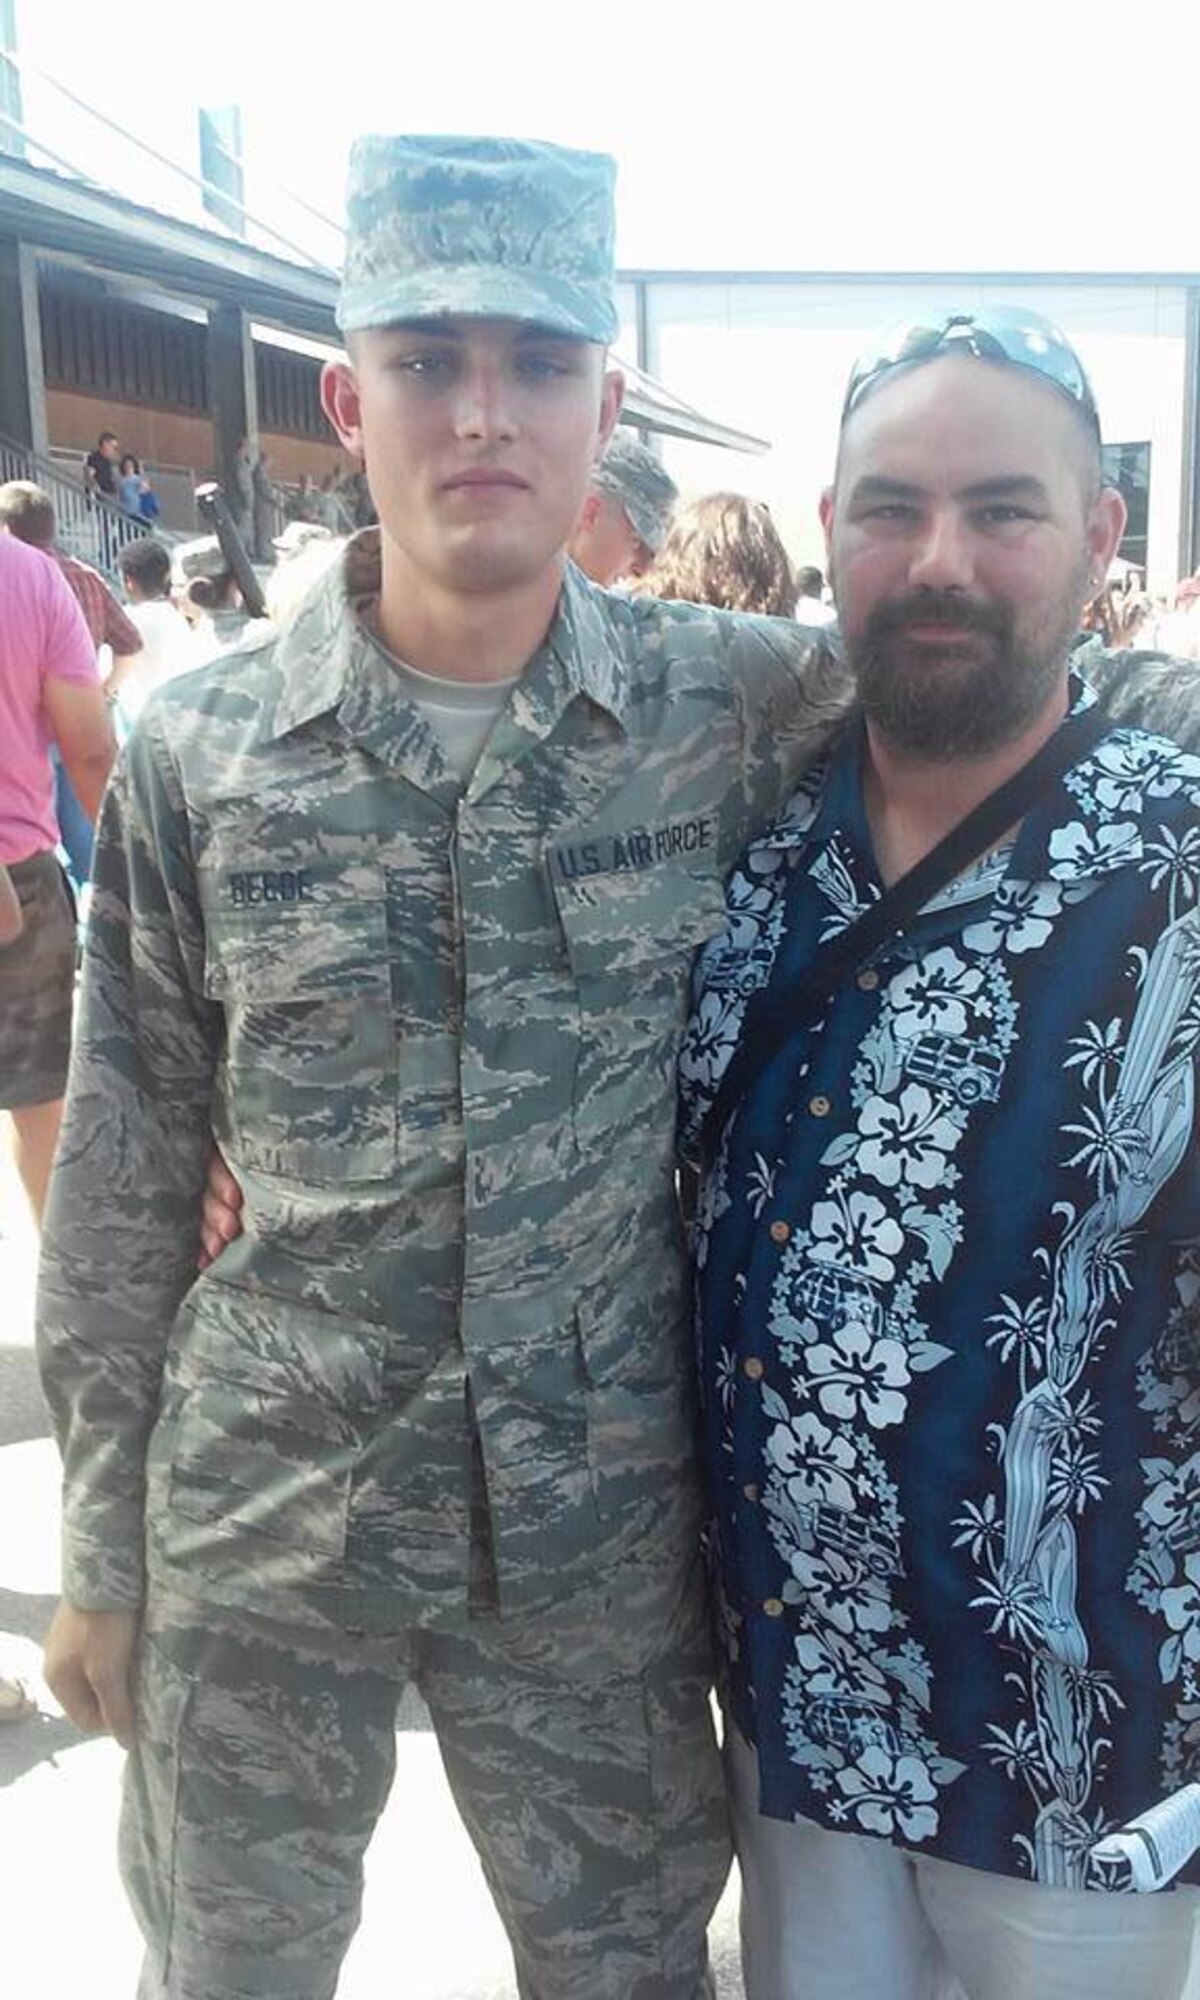 From left, then U.S. Airman Basic Jacob Beebe and his father, Orin Pickering, pose for a photo after Beebe’s basic military training graduation at Joint Base San Antonio-Lackland, Texas, in July 2015